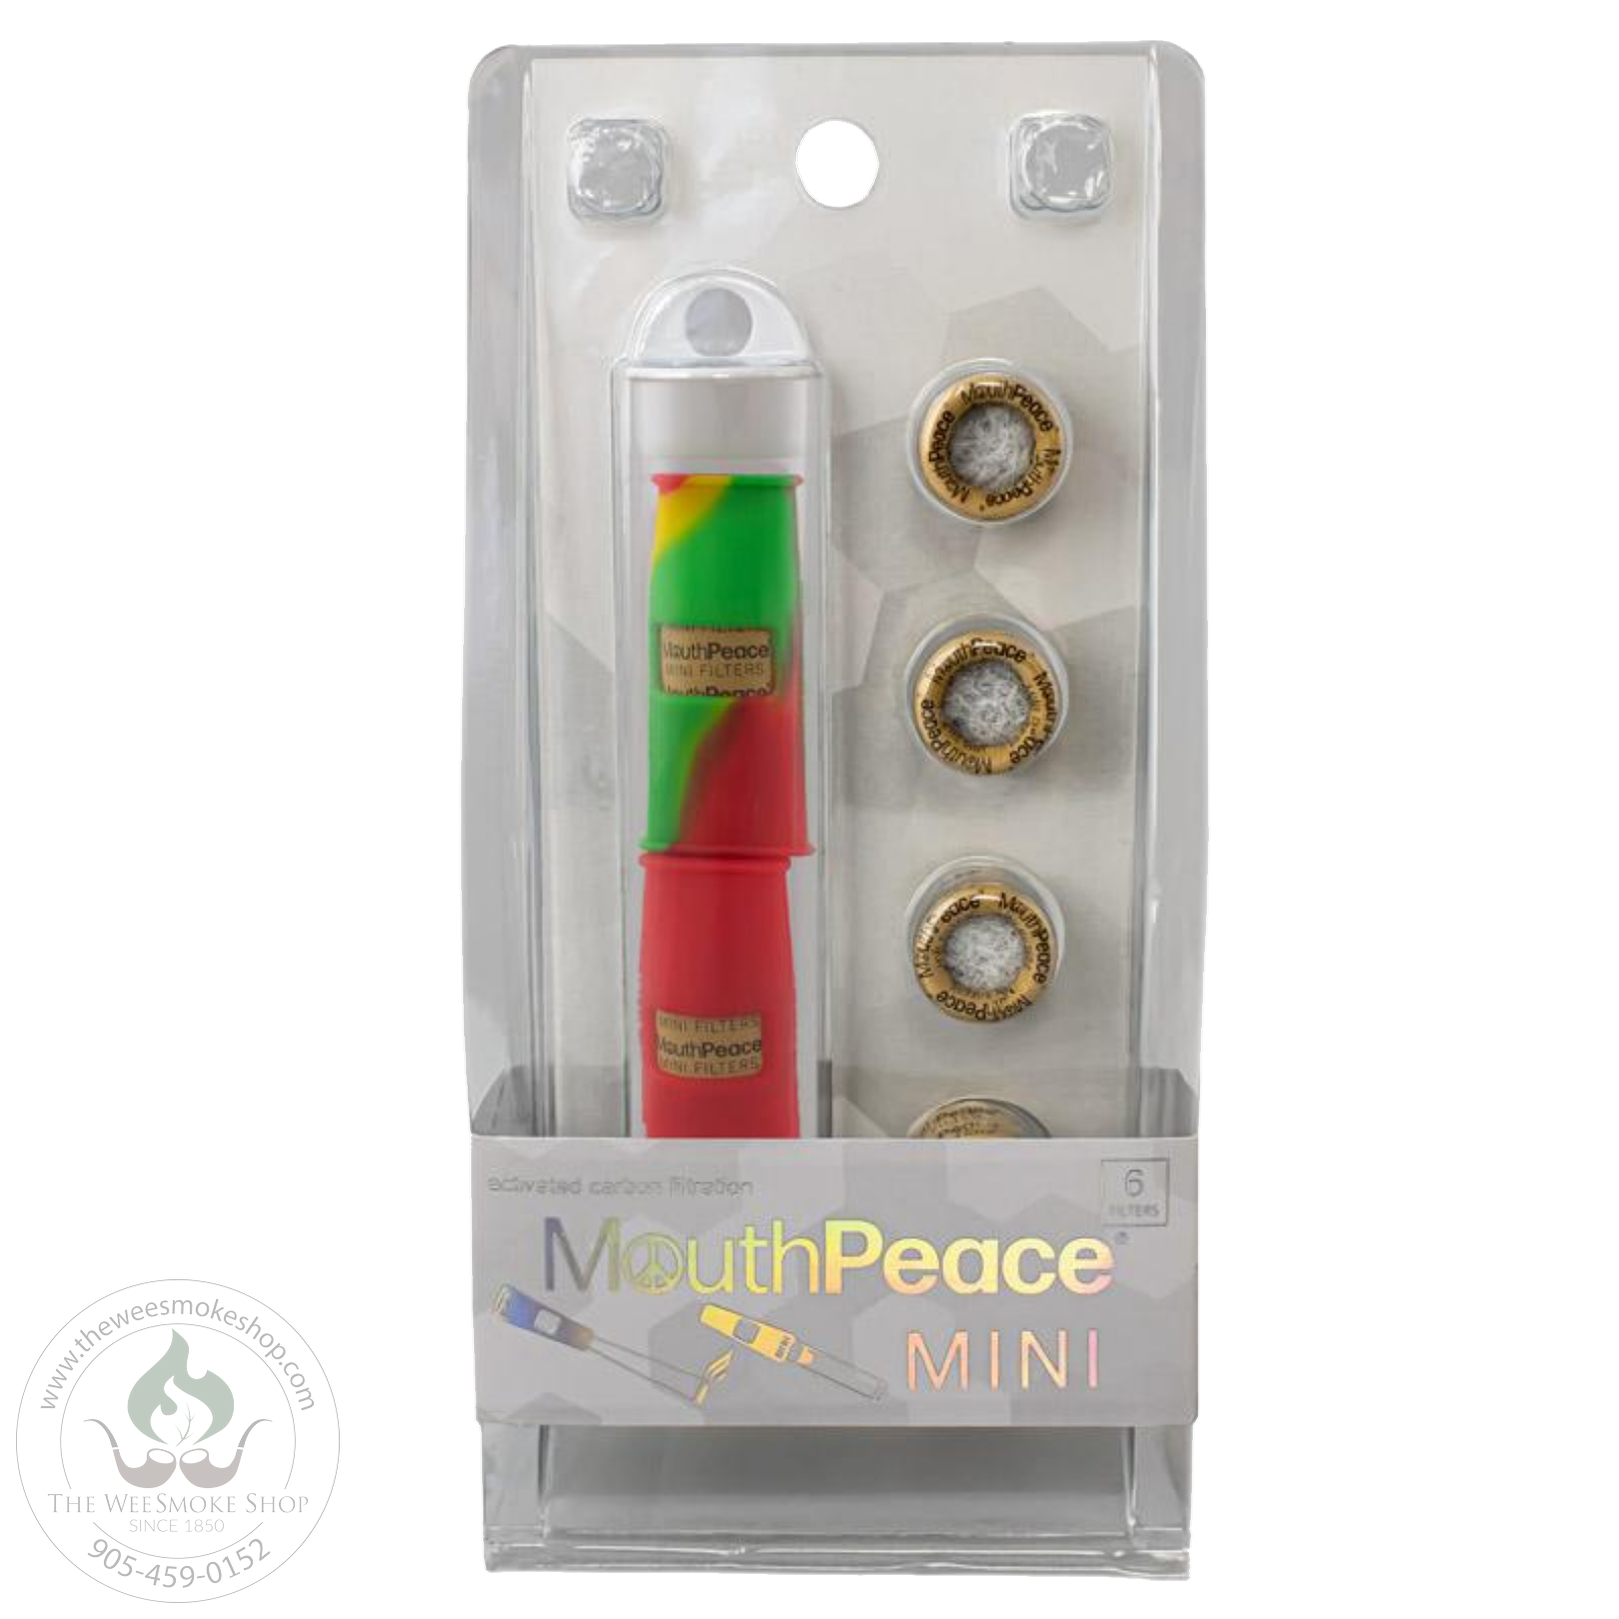 Moose Labs MouthPeace Mini in the color red and green swirl